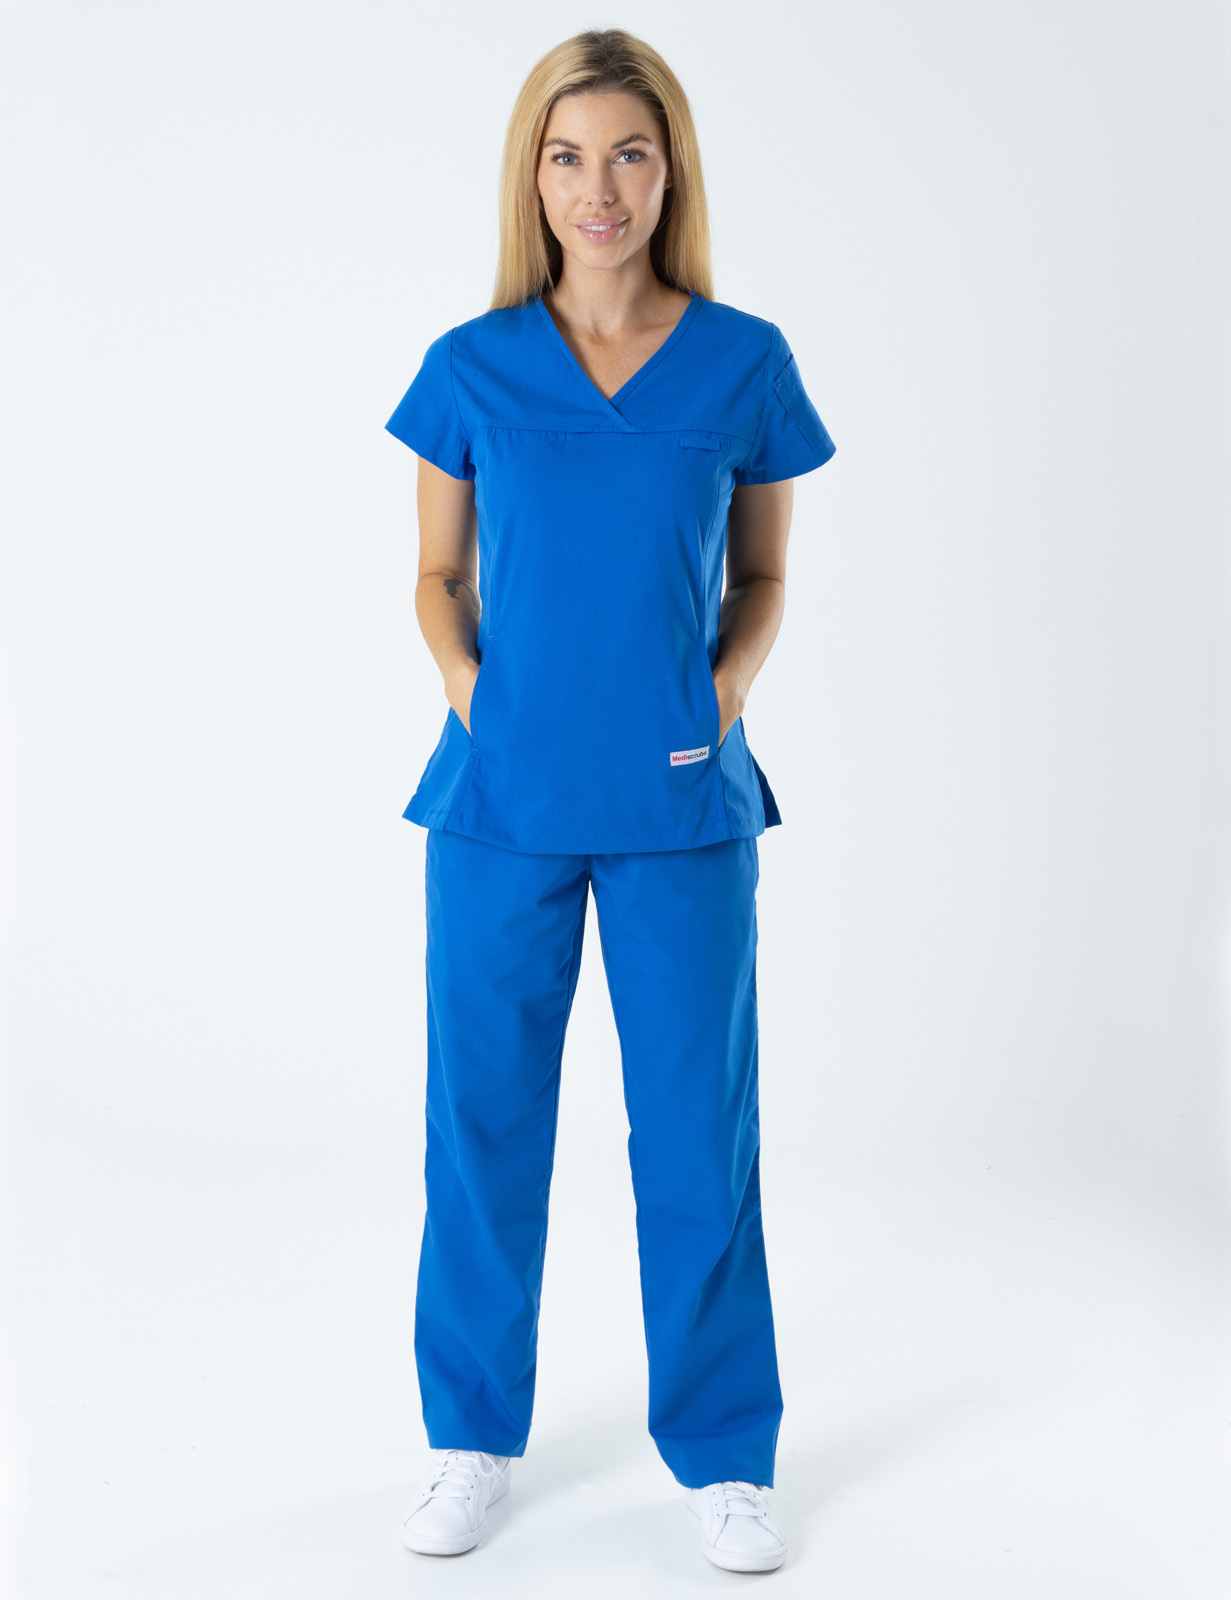 Cairns Base Hospital - ED Nurse (Women's Fit Solid Scrub Top and Cargo Pants in Royal incl Logos)